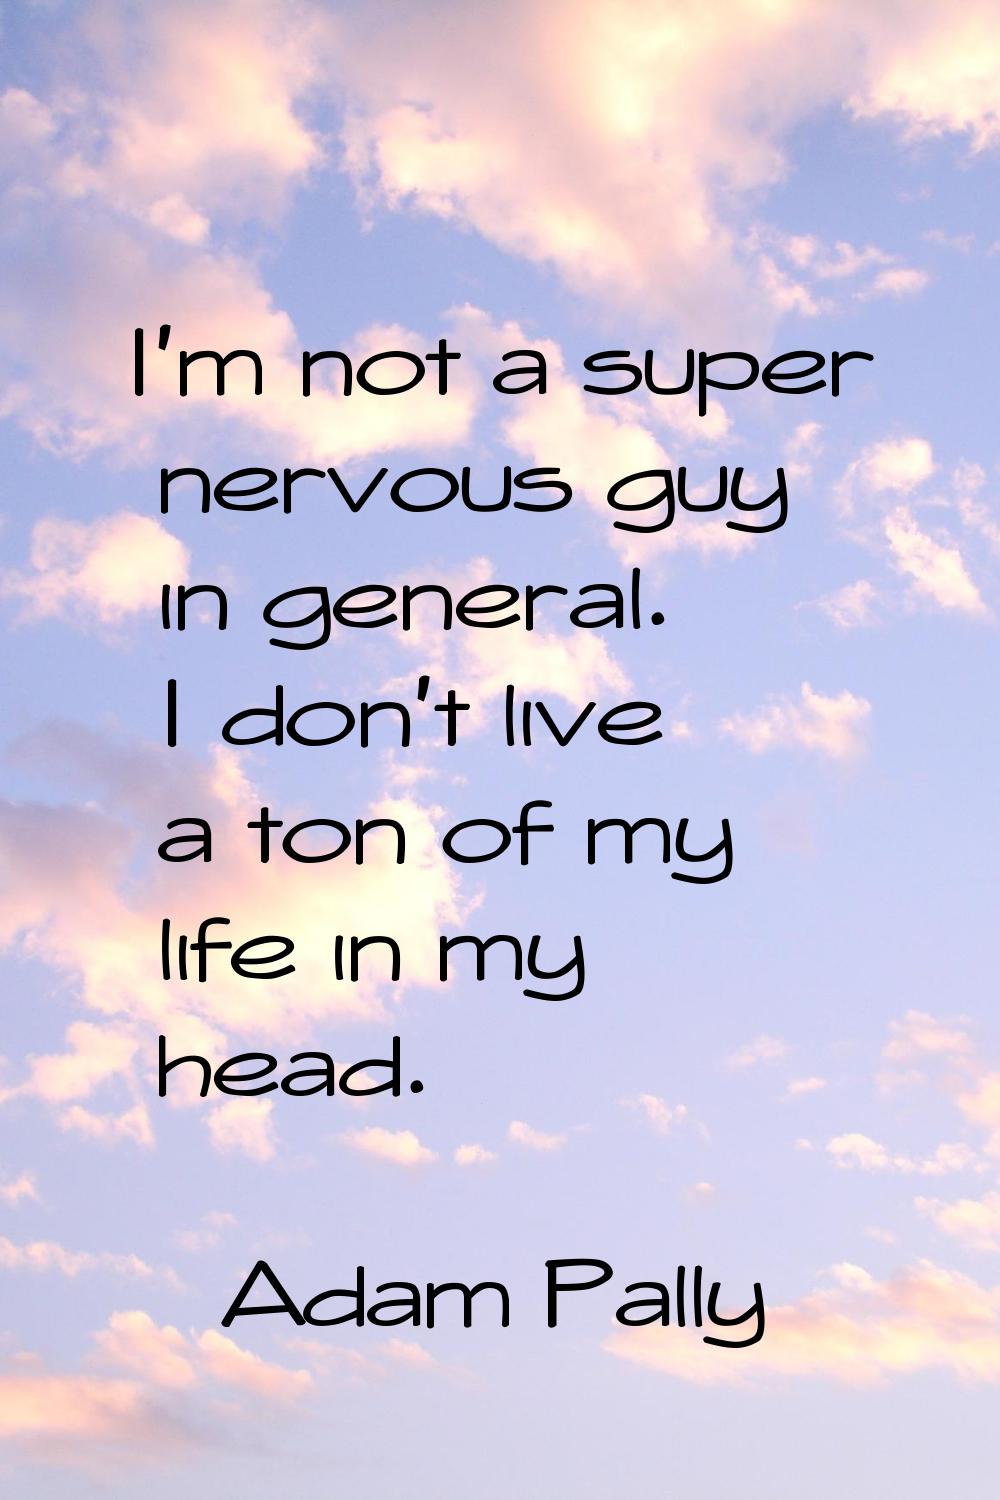 I'm not a super nervous guy in general. I don't live a ton of my life in my head.